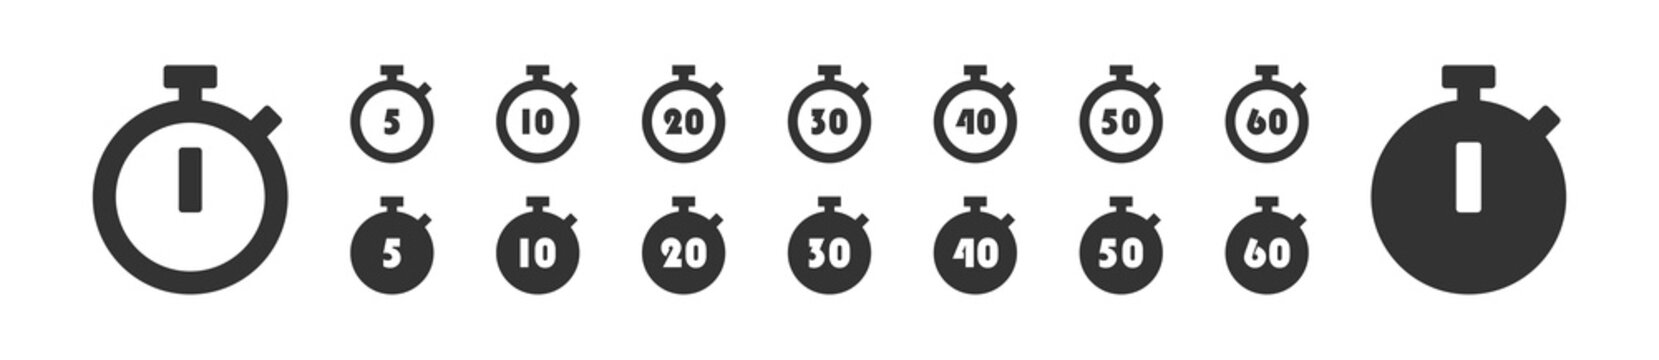 Stopwarch icon set. Clock symbol, timer sign. Countdown illustration in vector flat